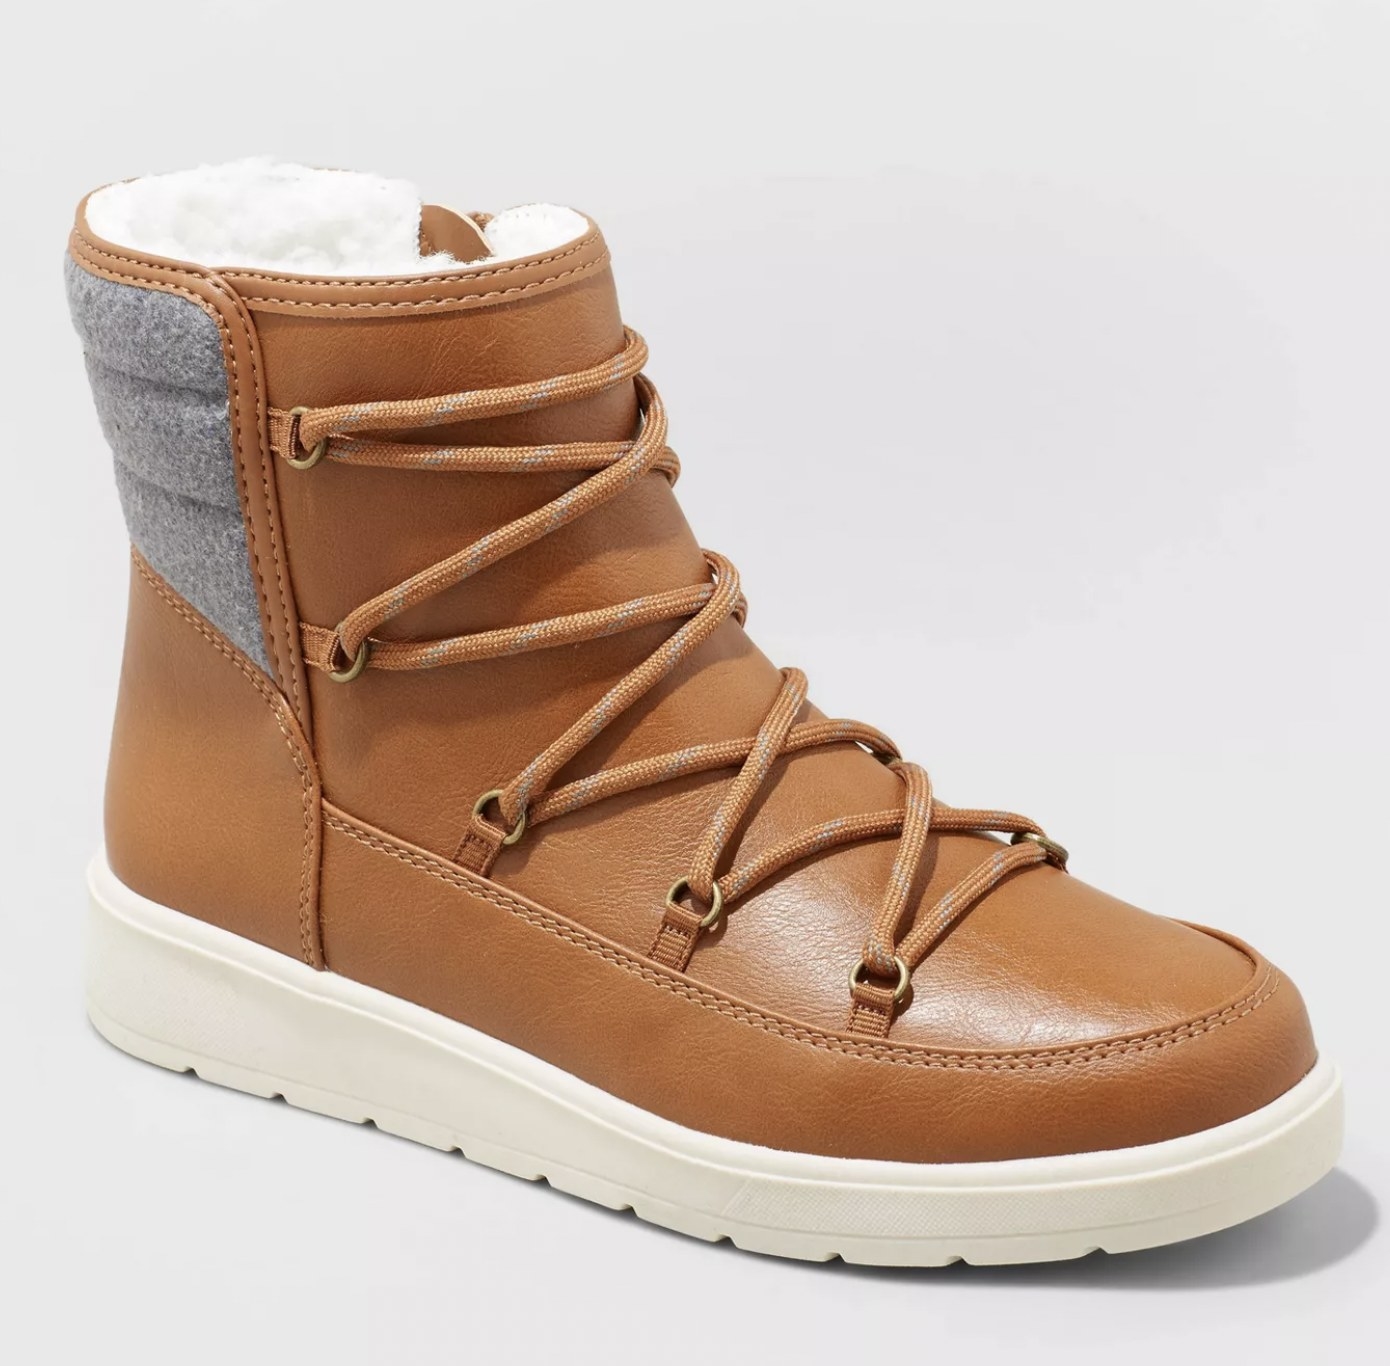 The tan laced boot with white rubber sole